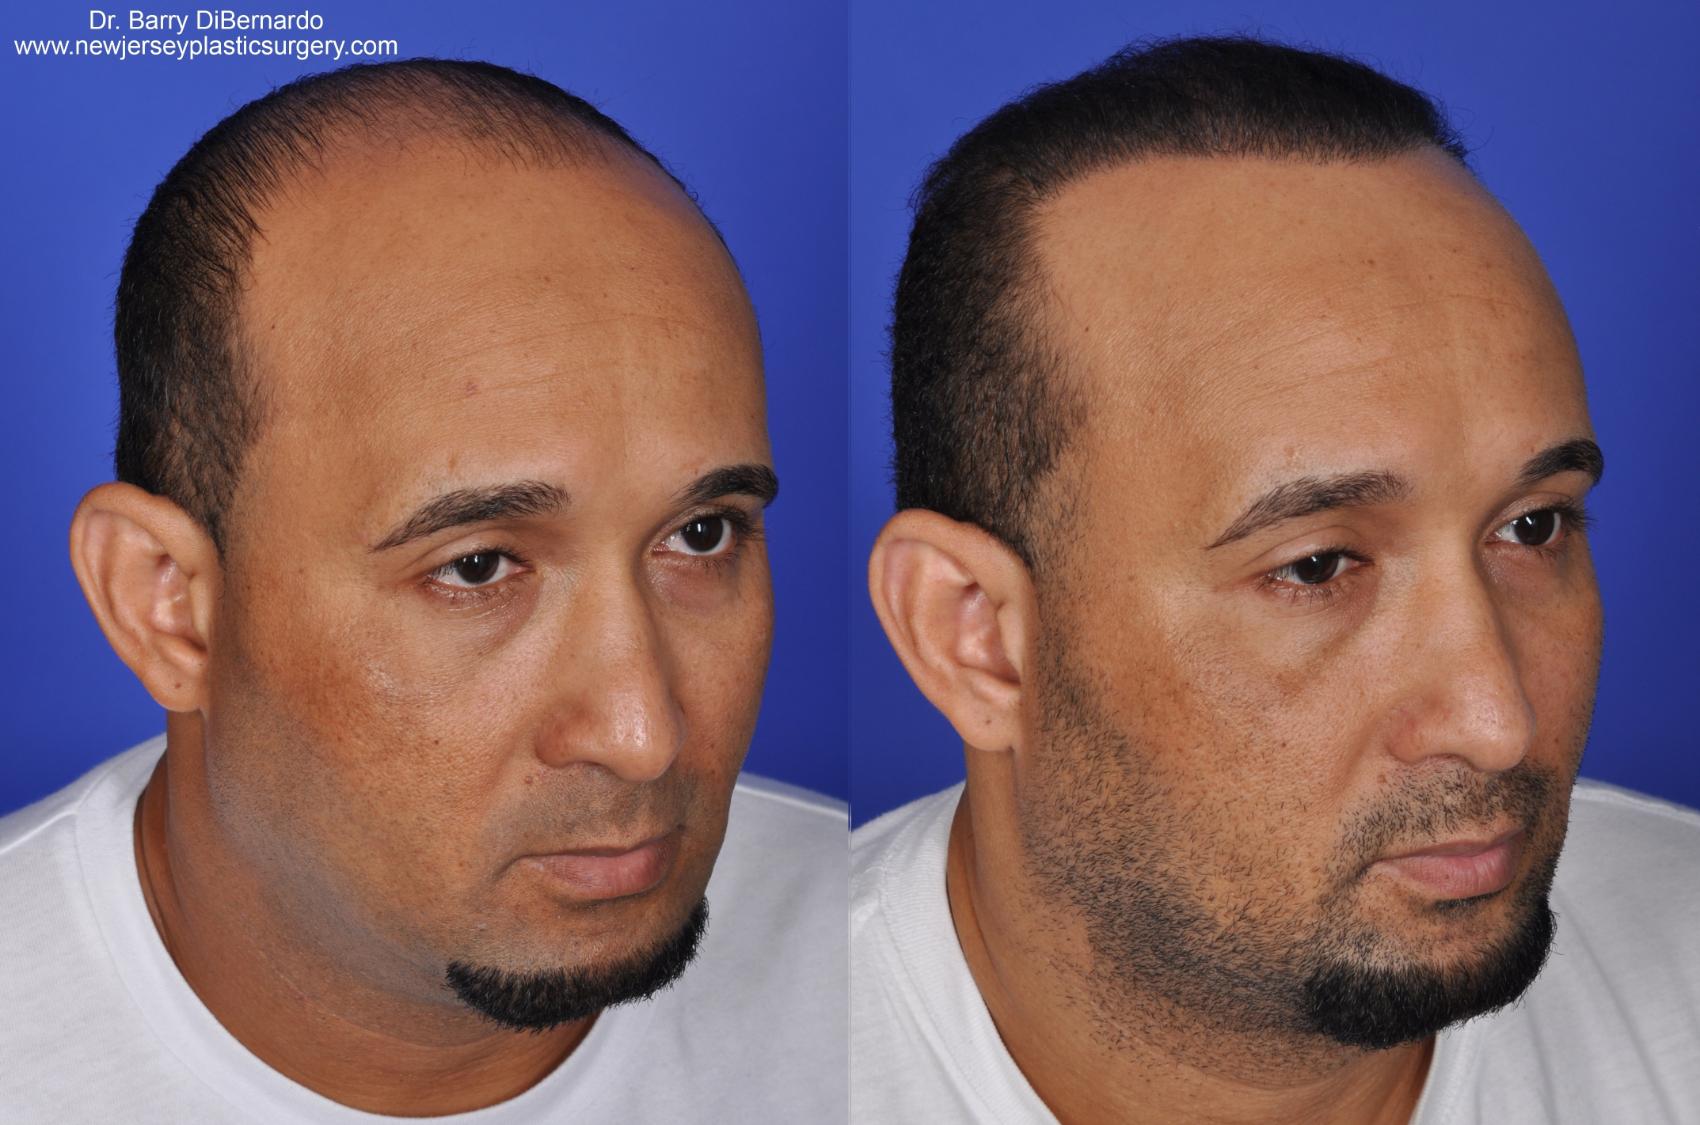 Hair Transplant Cost in Bangalore - Compare Prices, Reviews, Best Doctors &  Appointment - MedContour